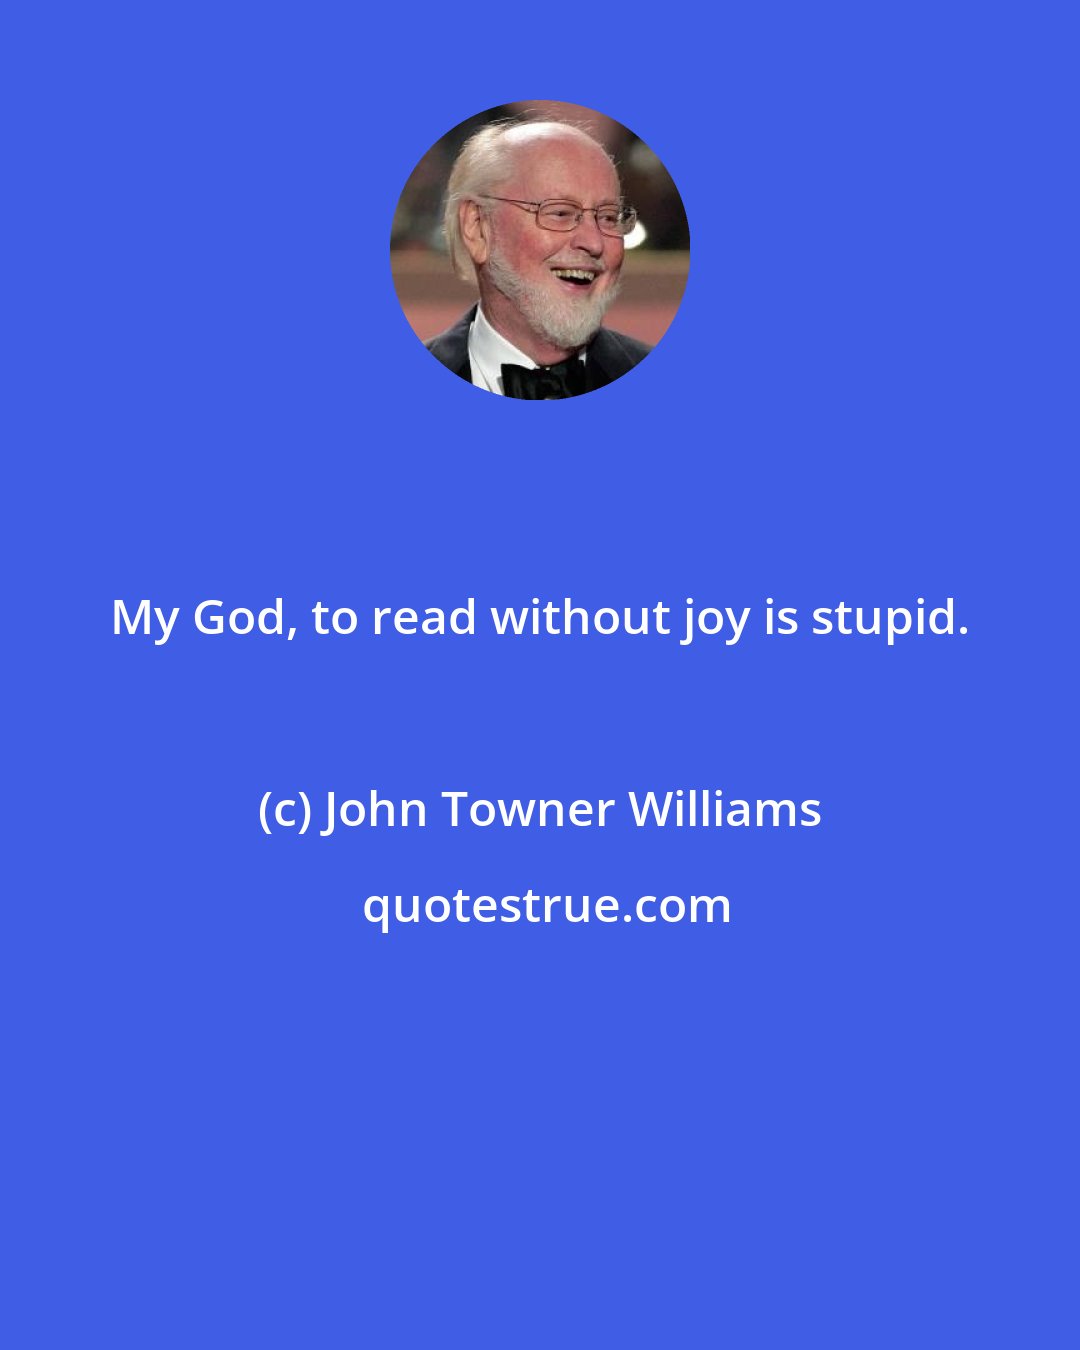 John Towner Williams: My God, to read without joy is stupid.